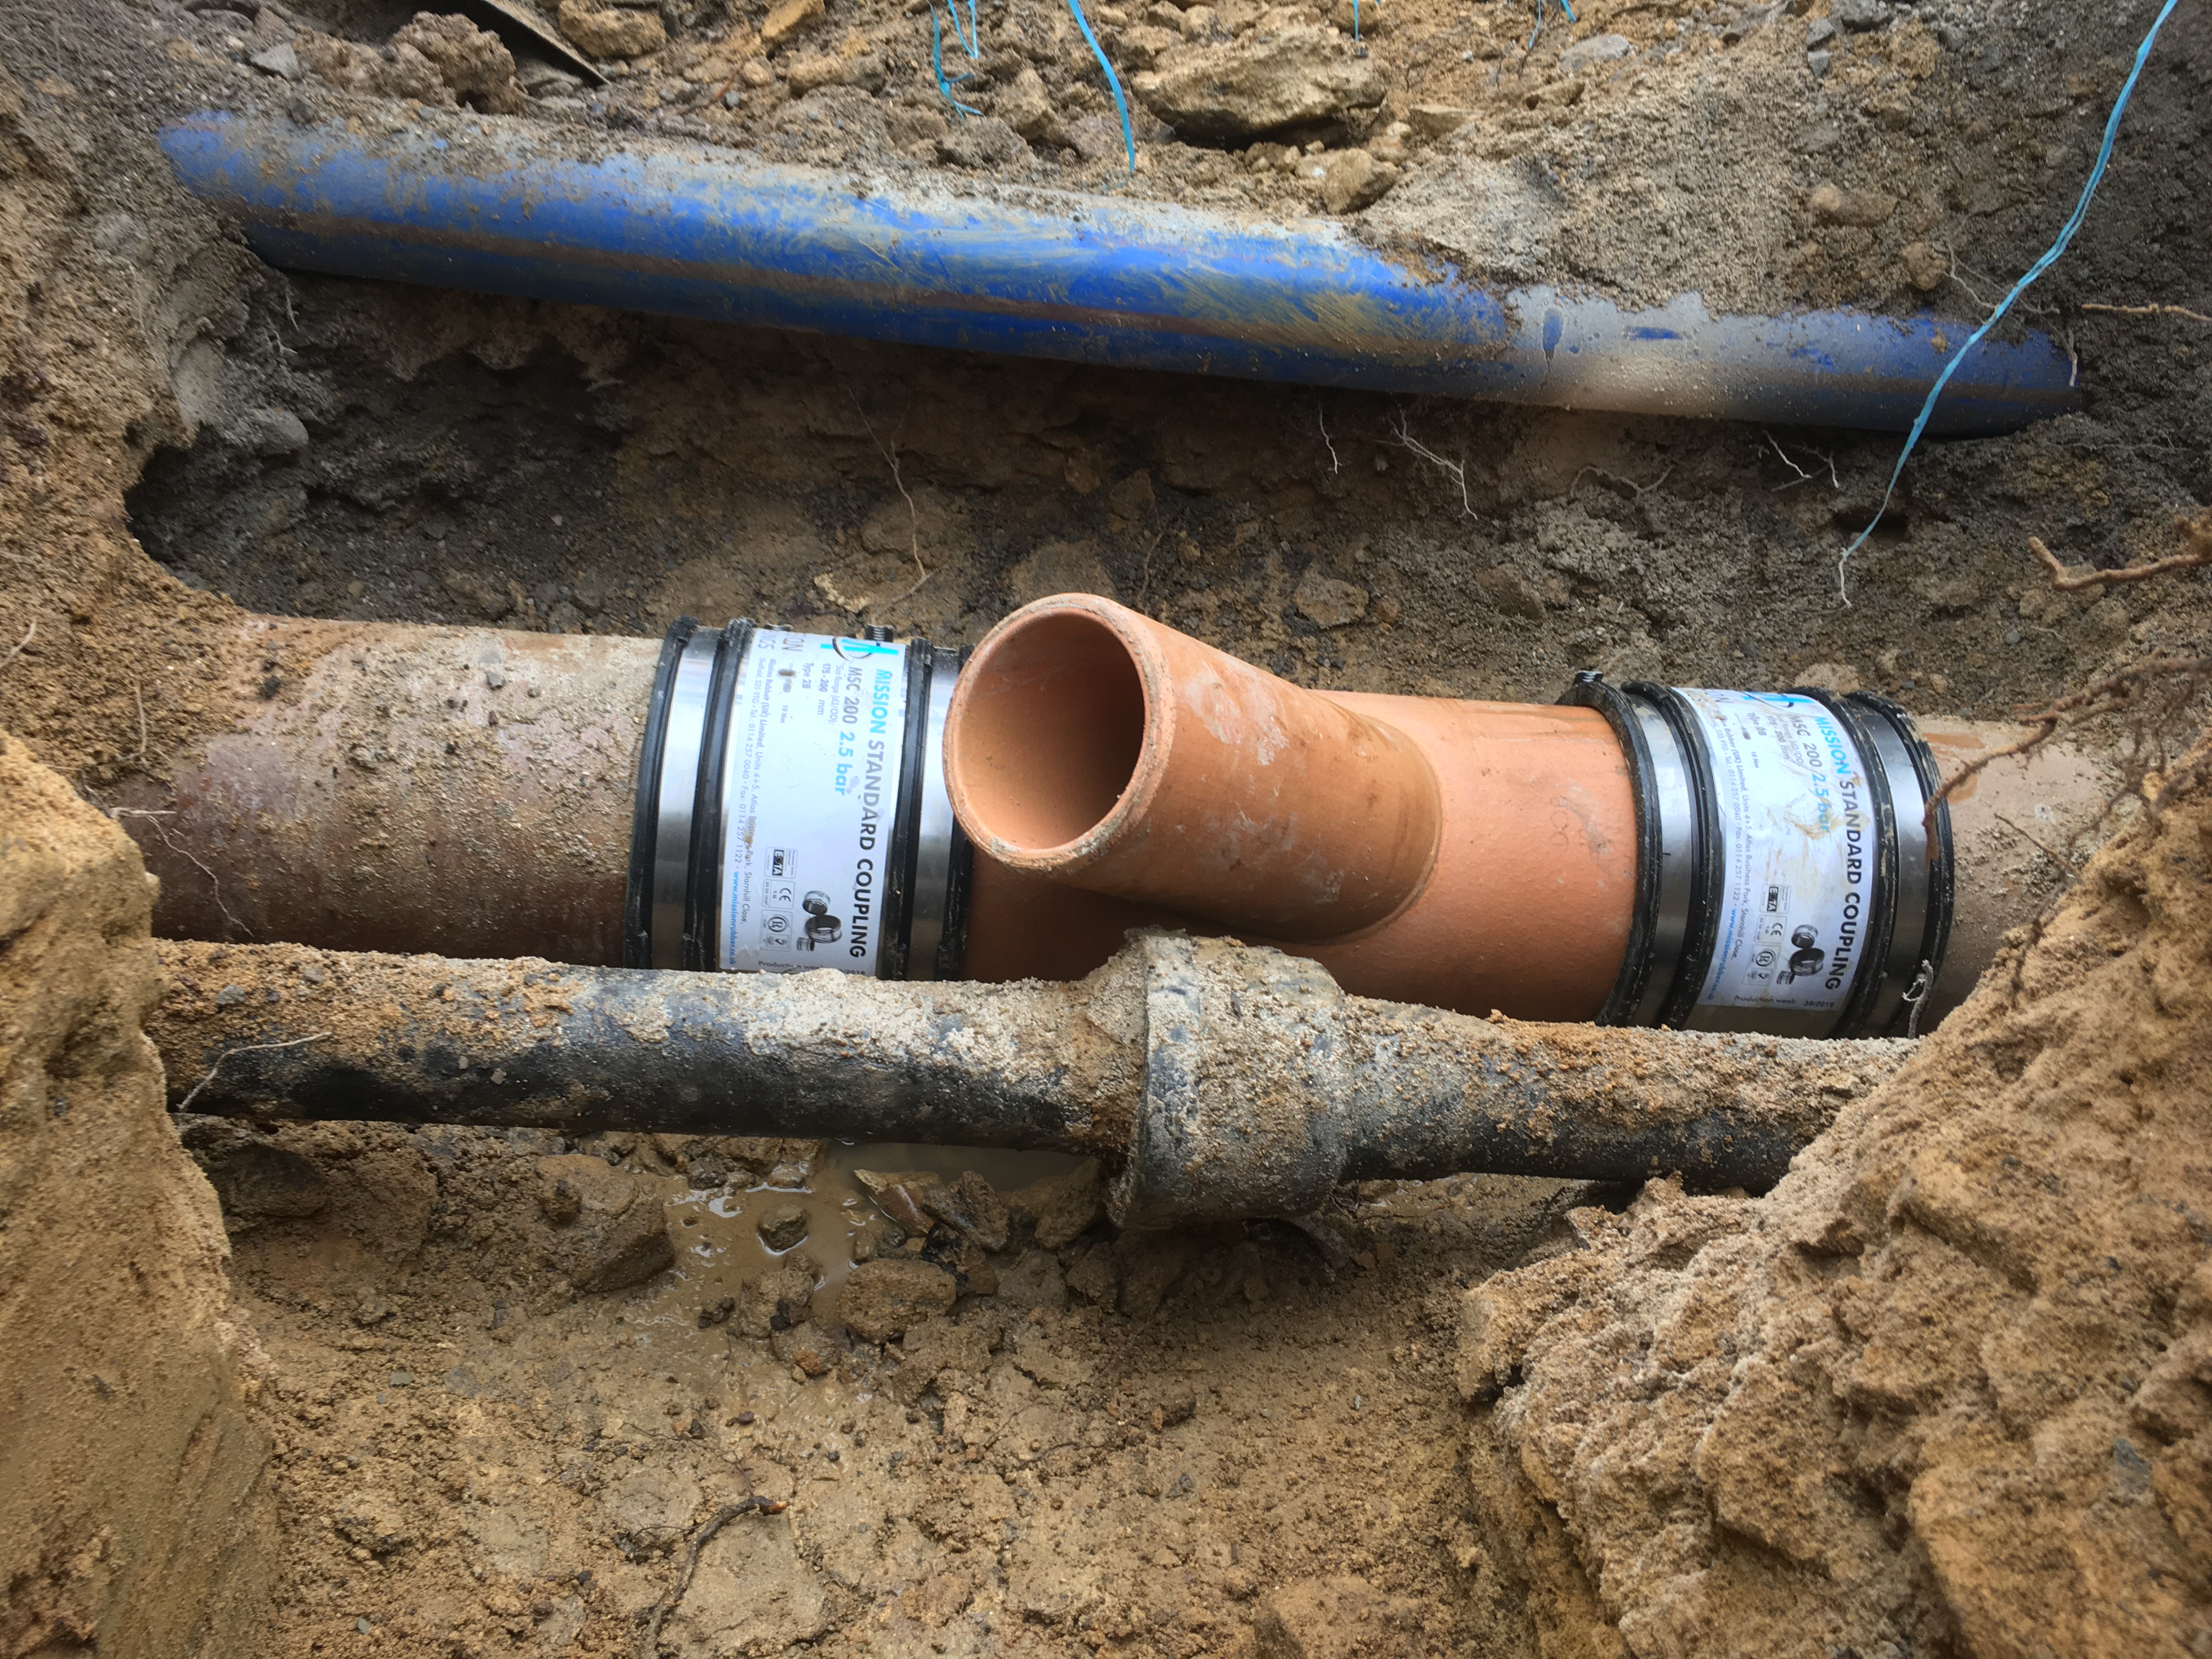 Sewer line connection detail